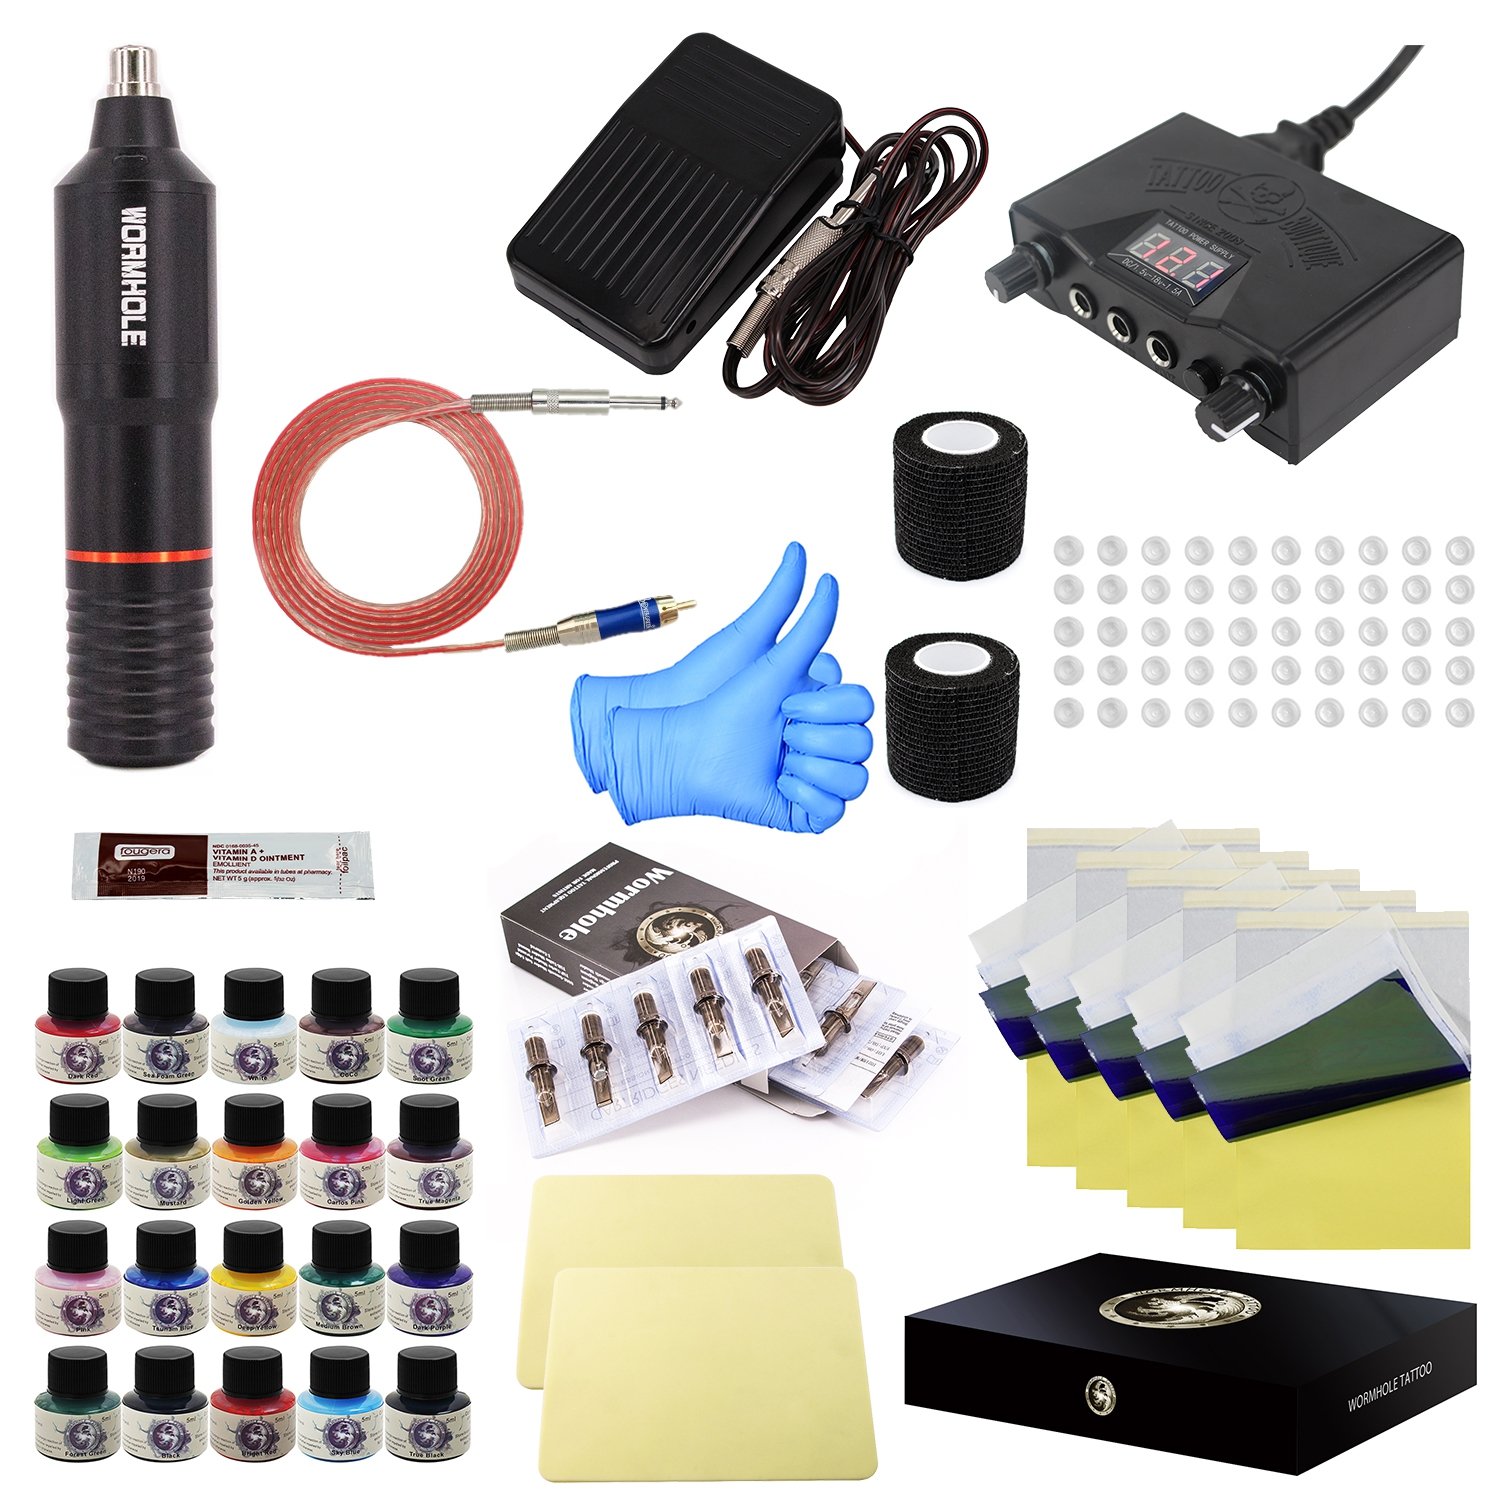 Best Tattoo Kit for Beginners - The Sports Daily